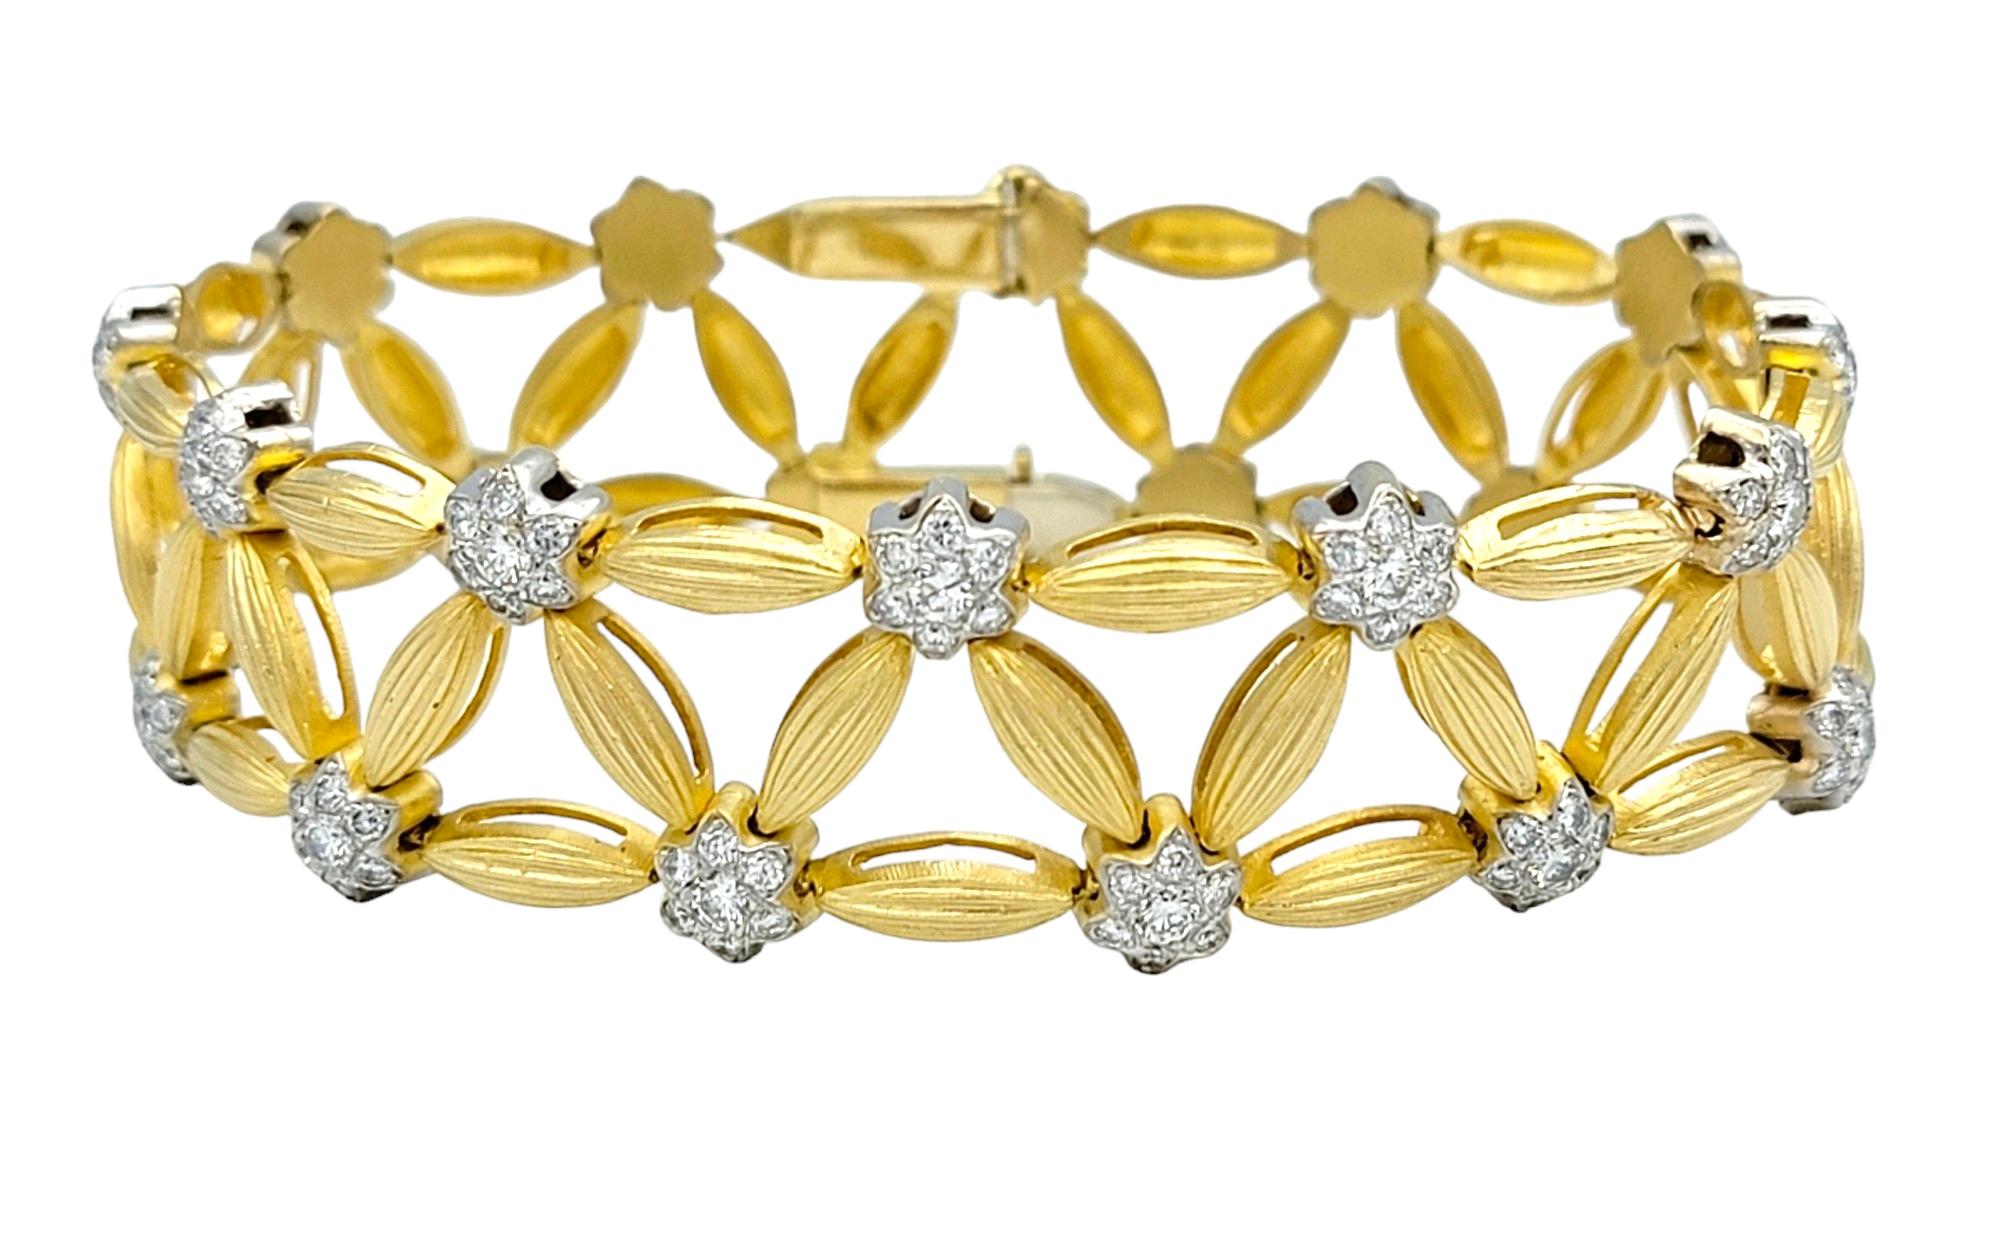 The inner circumference of this bracelet measures 7.13 inches and will comfortably fit up to a 7 inch wrist. 

This exquisite diamond flower and leaf bracelet, a masterpiece of elegance and grace. Crafted in lustrous 18 karat yellow gold, this